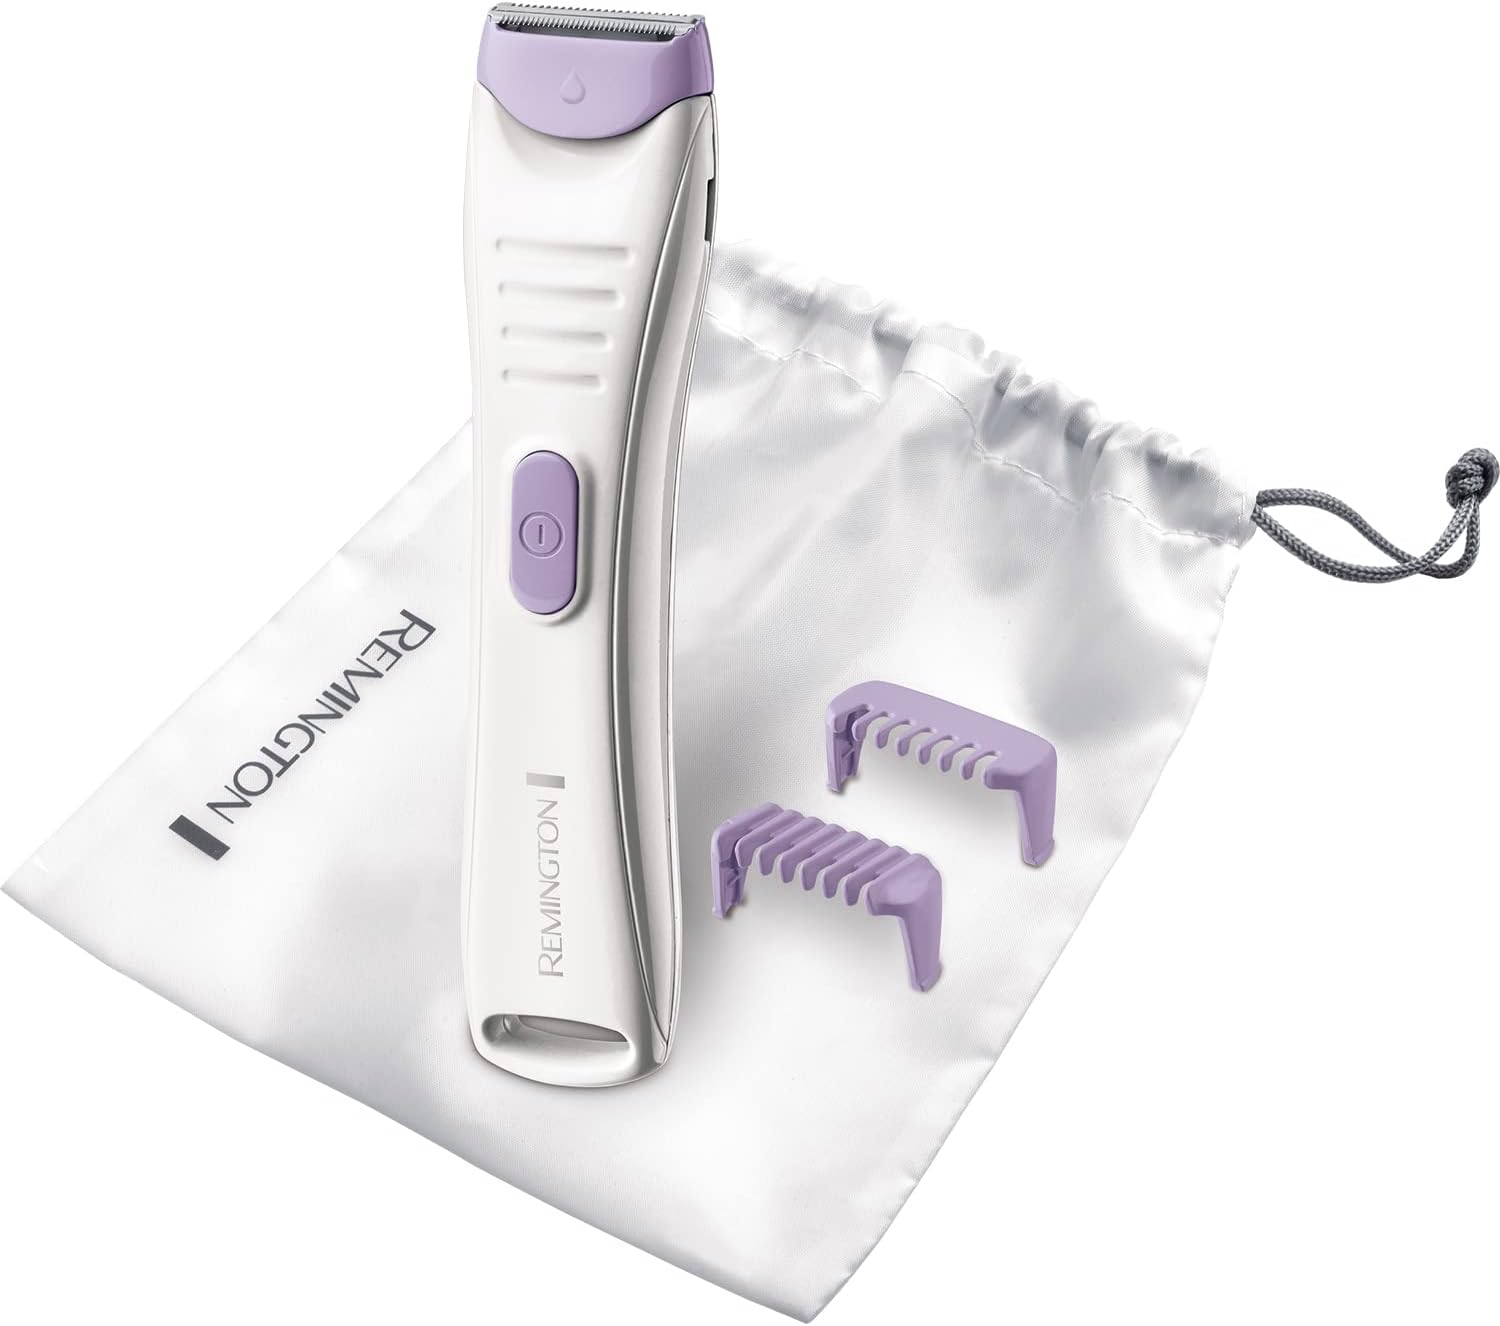 Remington Smooth and Silky Cordless Women's Wet and Dry Bikini Trimmer with 2 Comfort Combs and Beauty Bag, BKT4000,